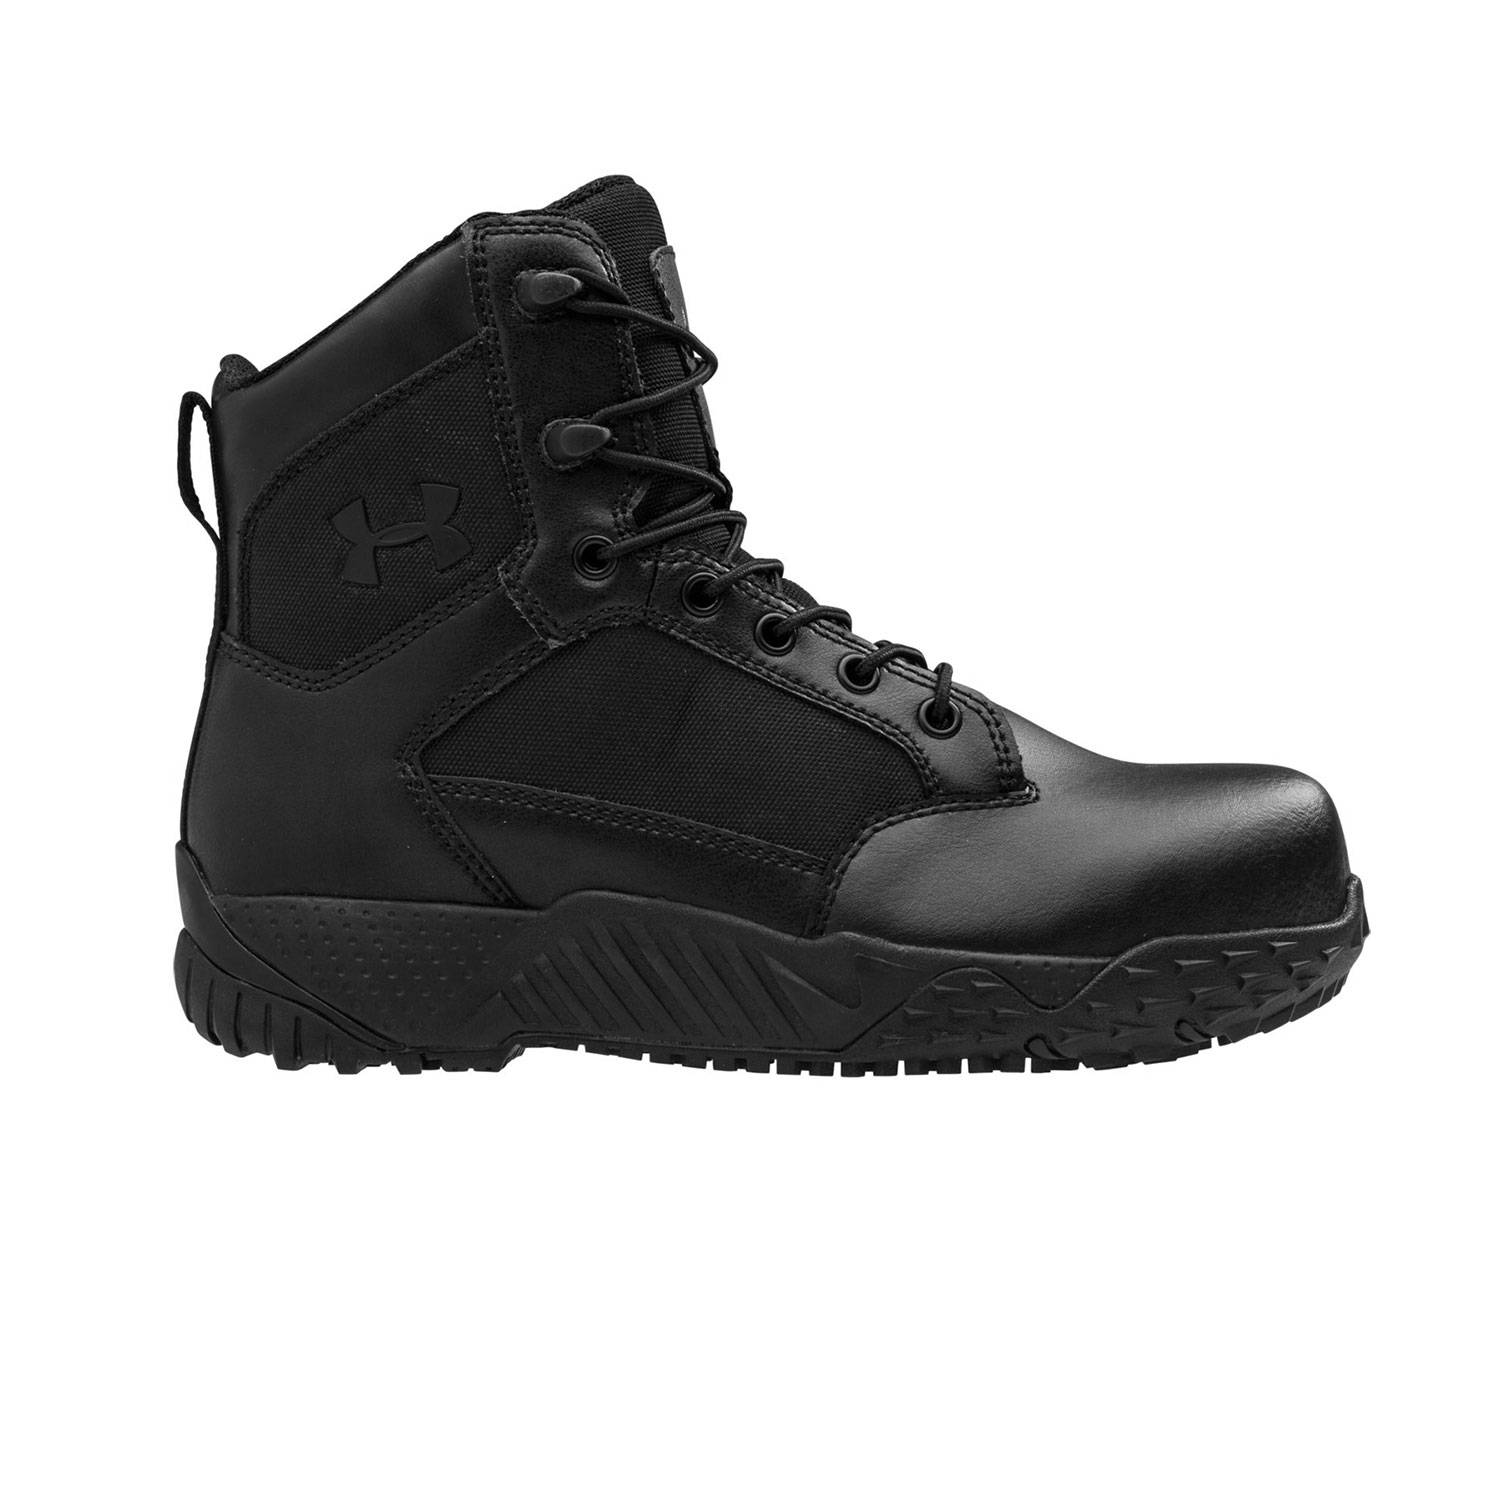 Stellar Tac Protect Composite Toe Boot